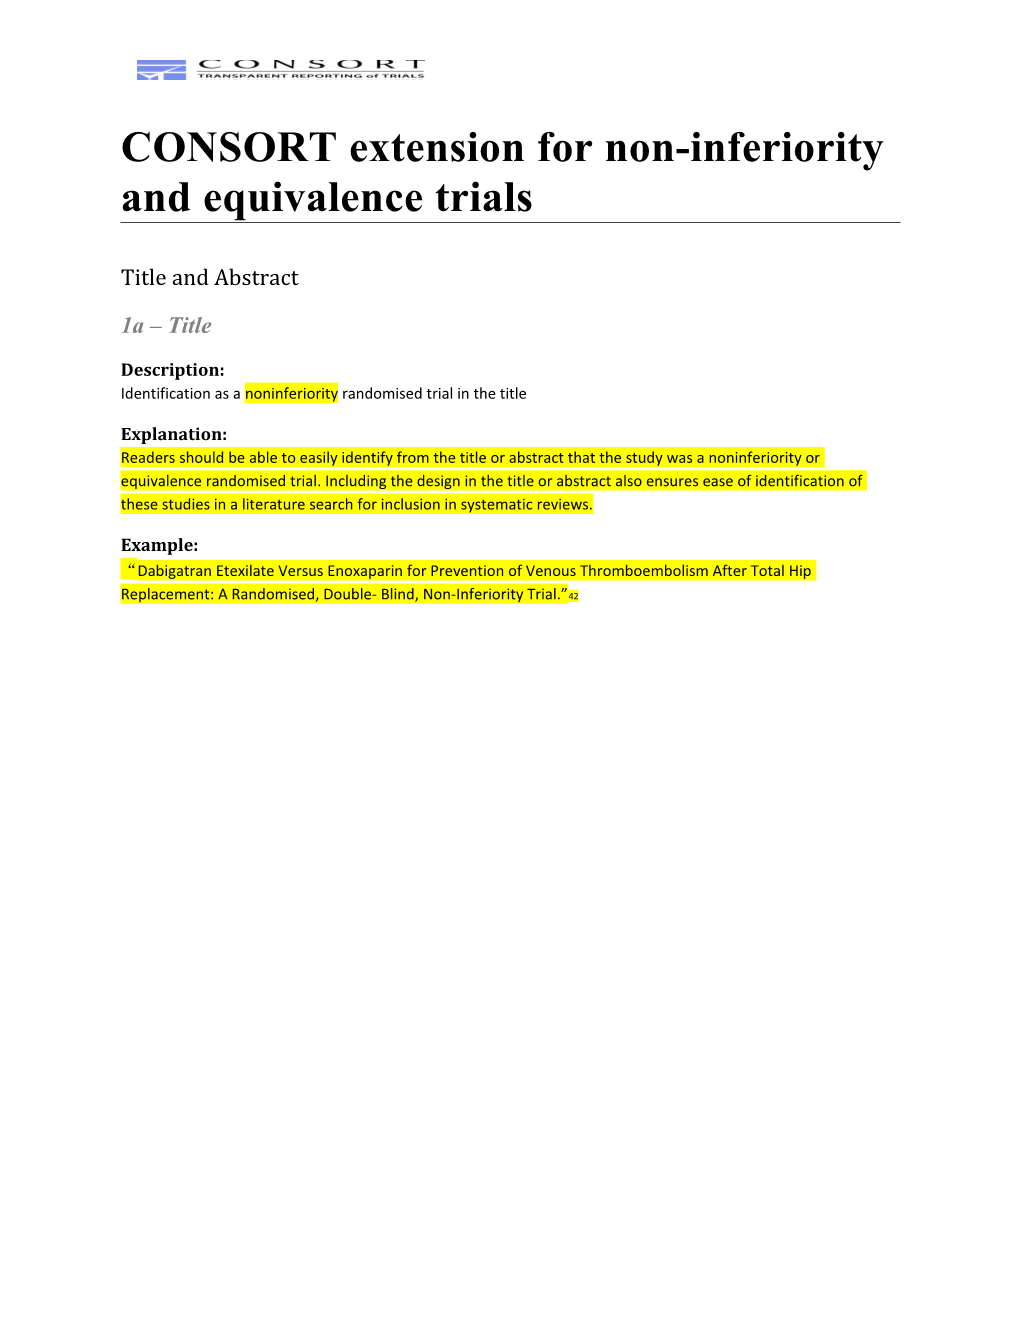 CONSORT Extension for Non-Inferiority and Equivalence Trials